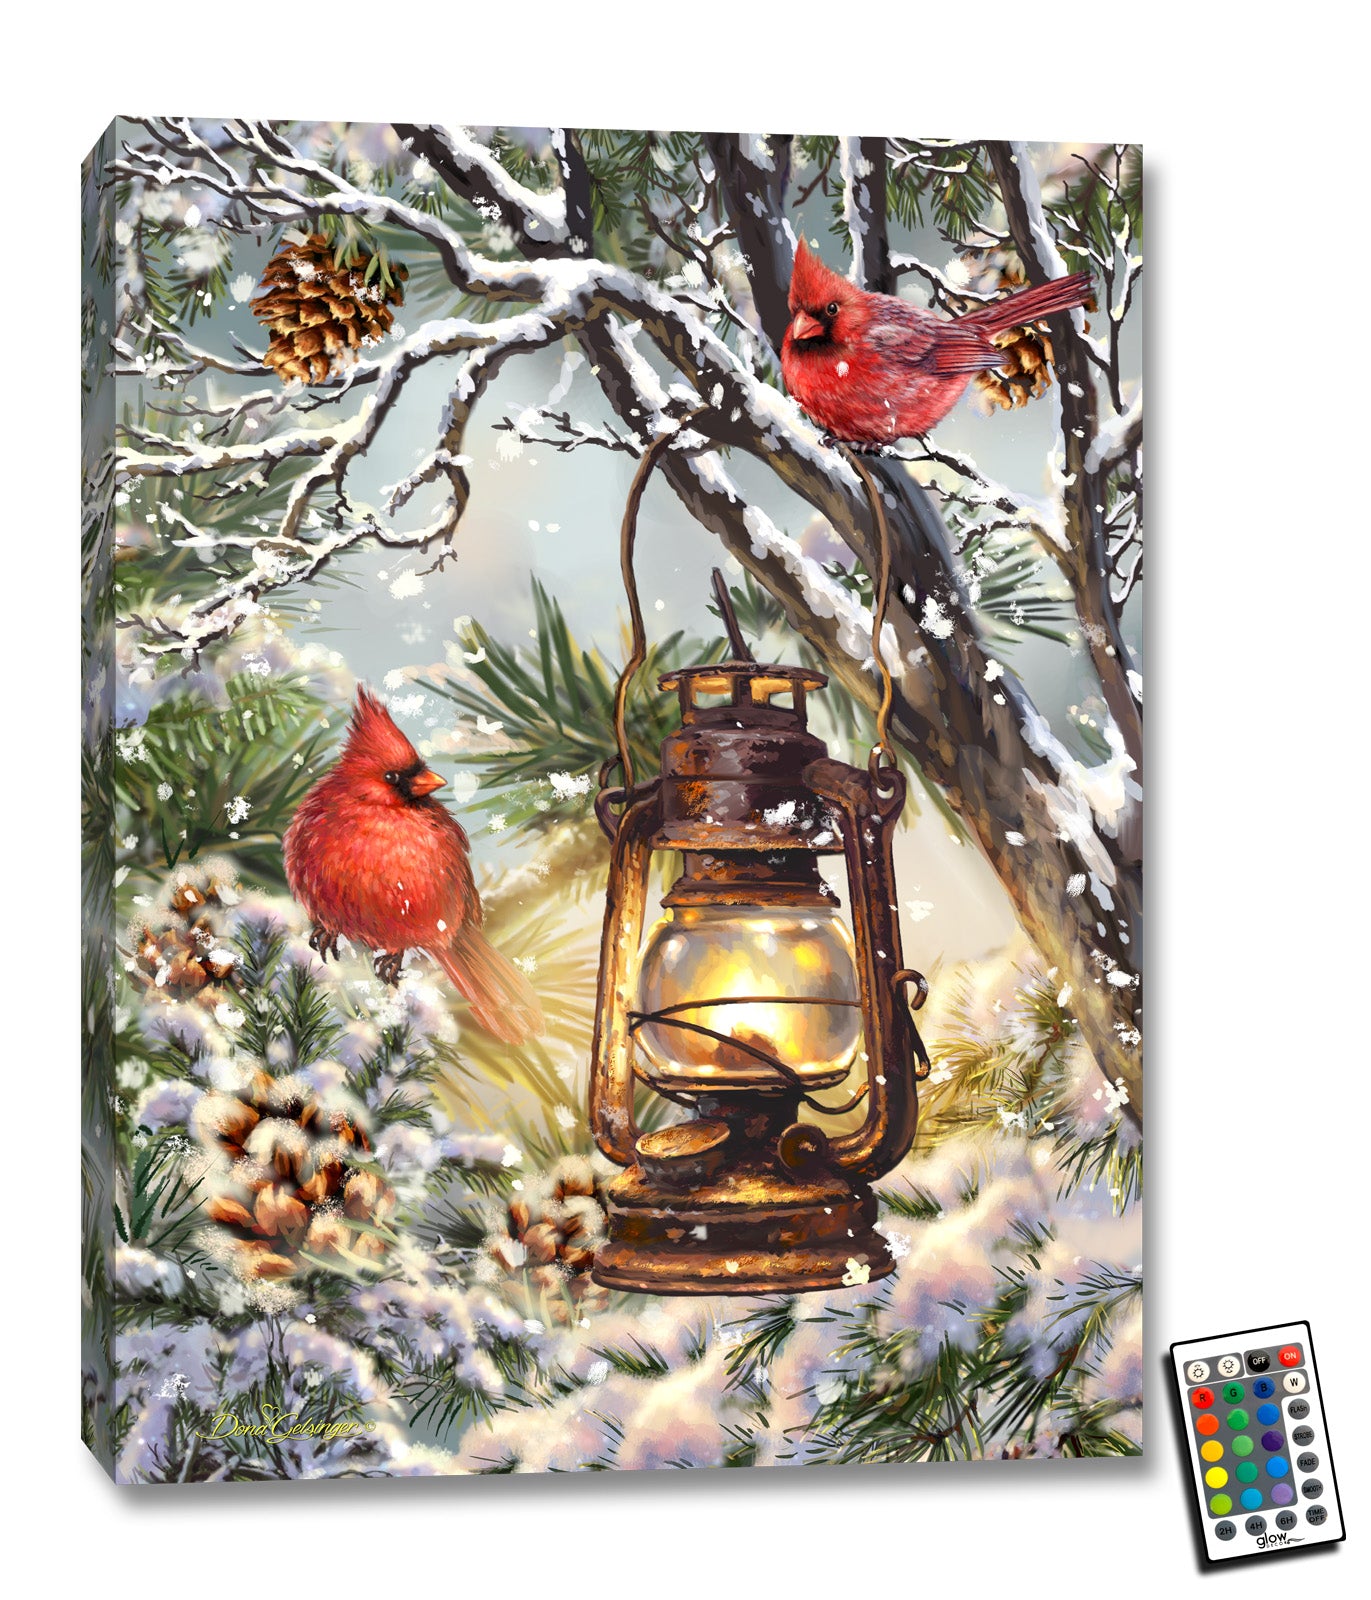 This stunning piece features two beautiful cardinals perched on a snow-covered tree, with a warm lantern nestled between them.